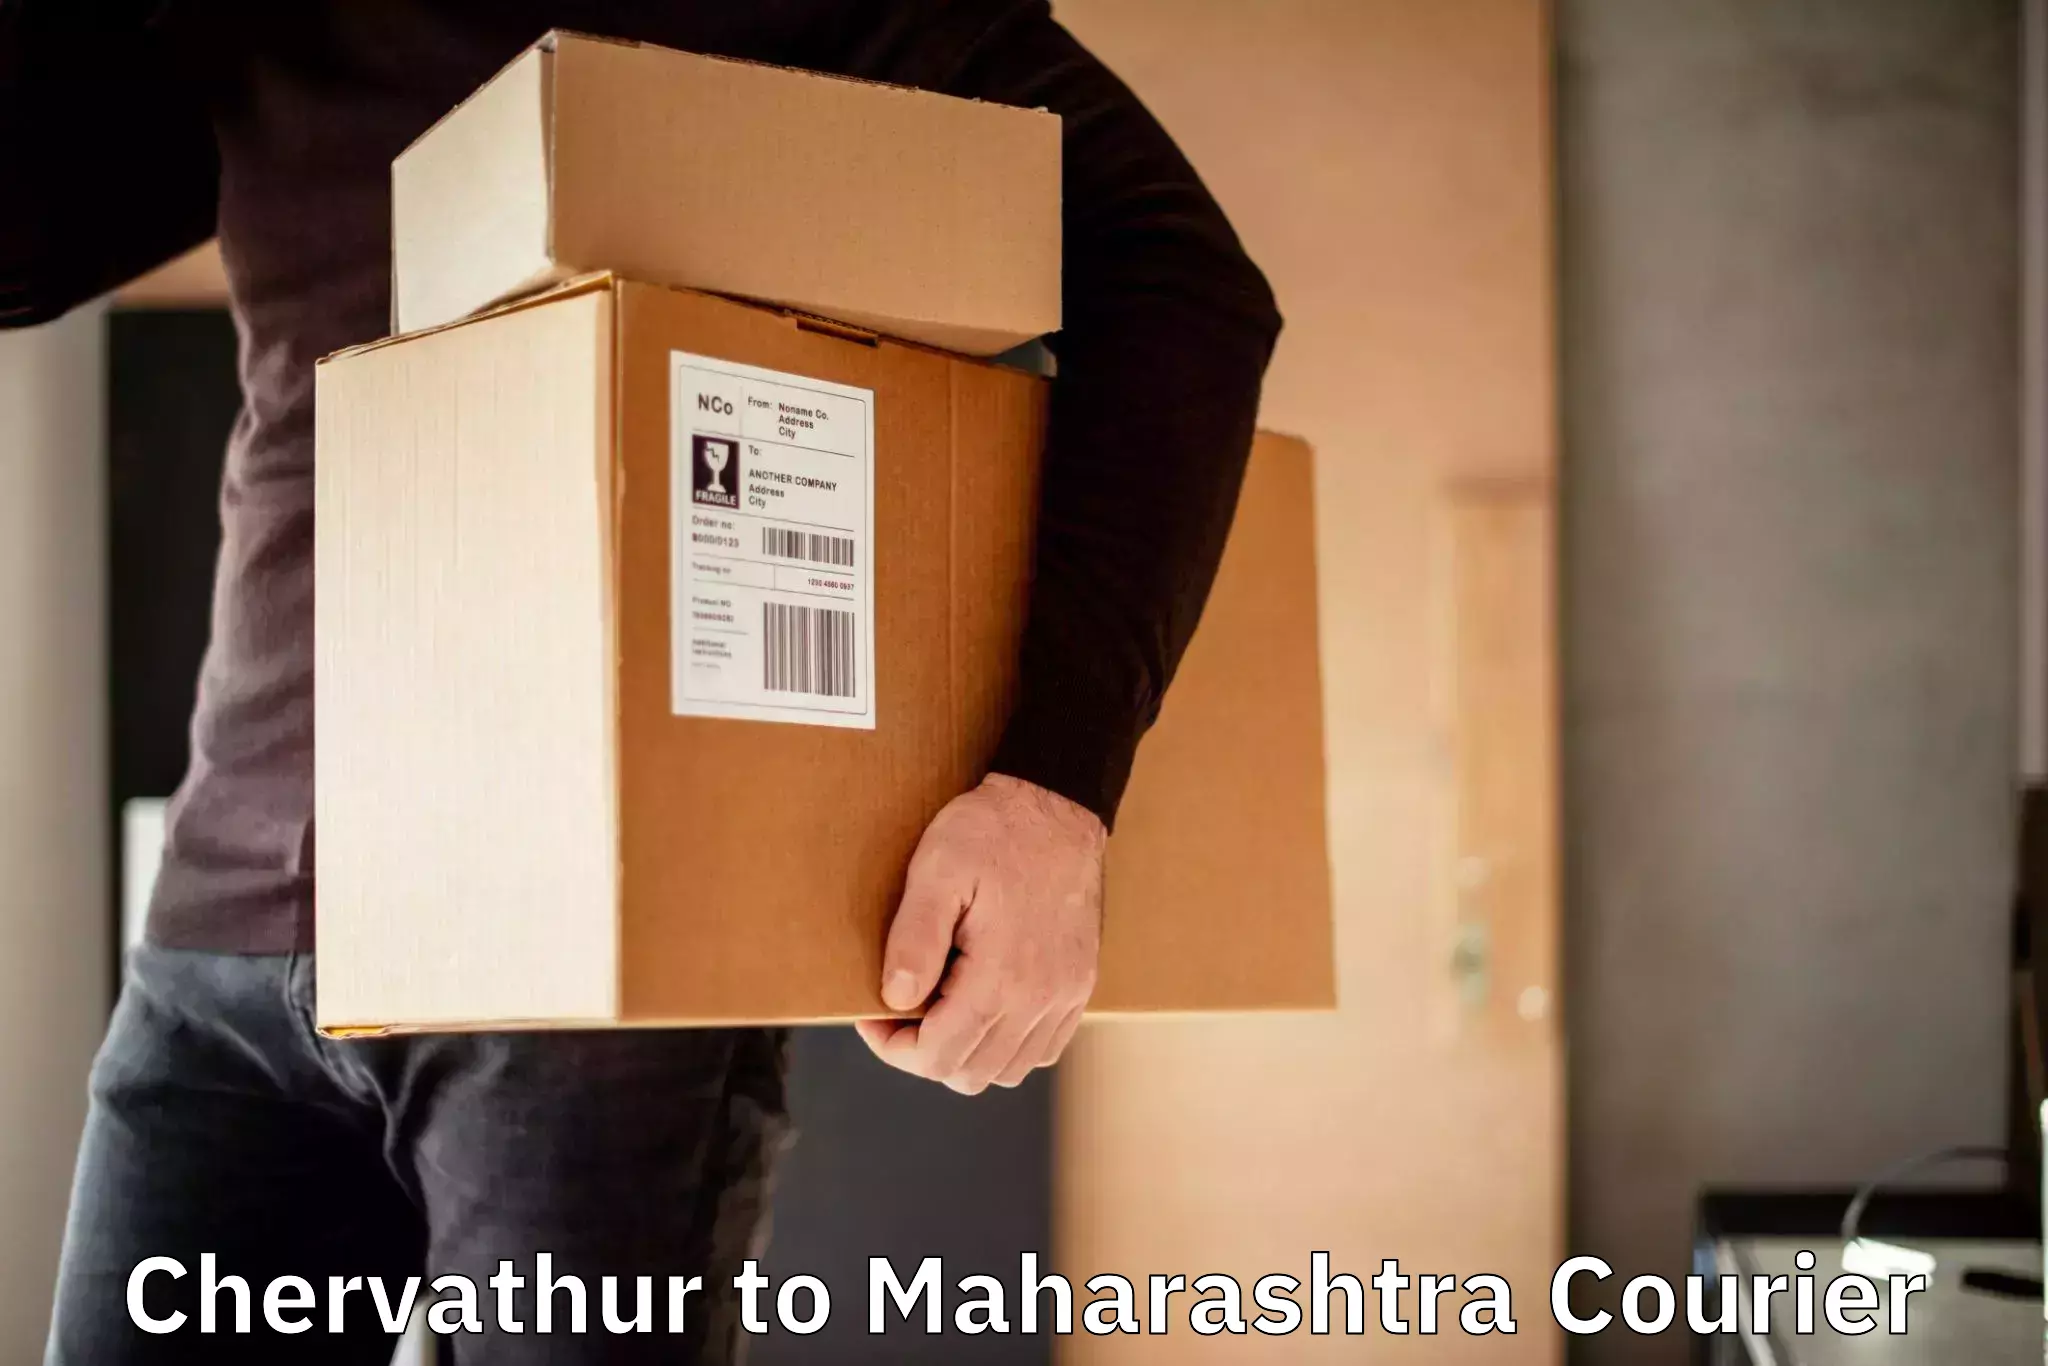 Courier service booking Chervathur to Sindhudurg